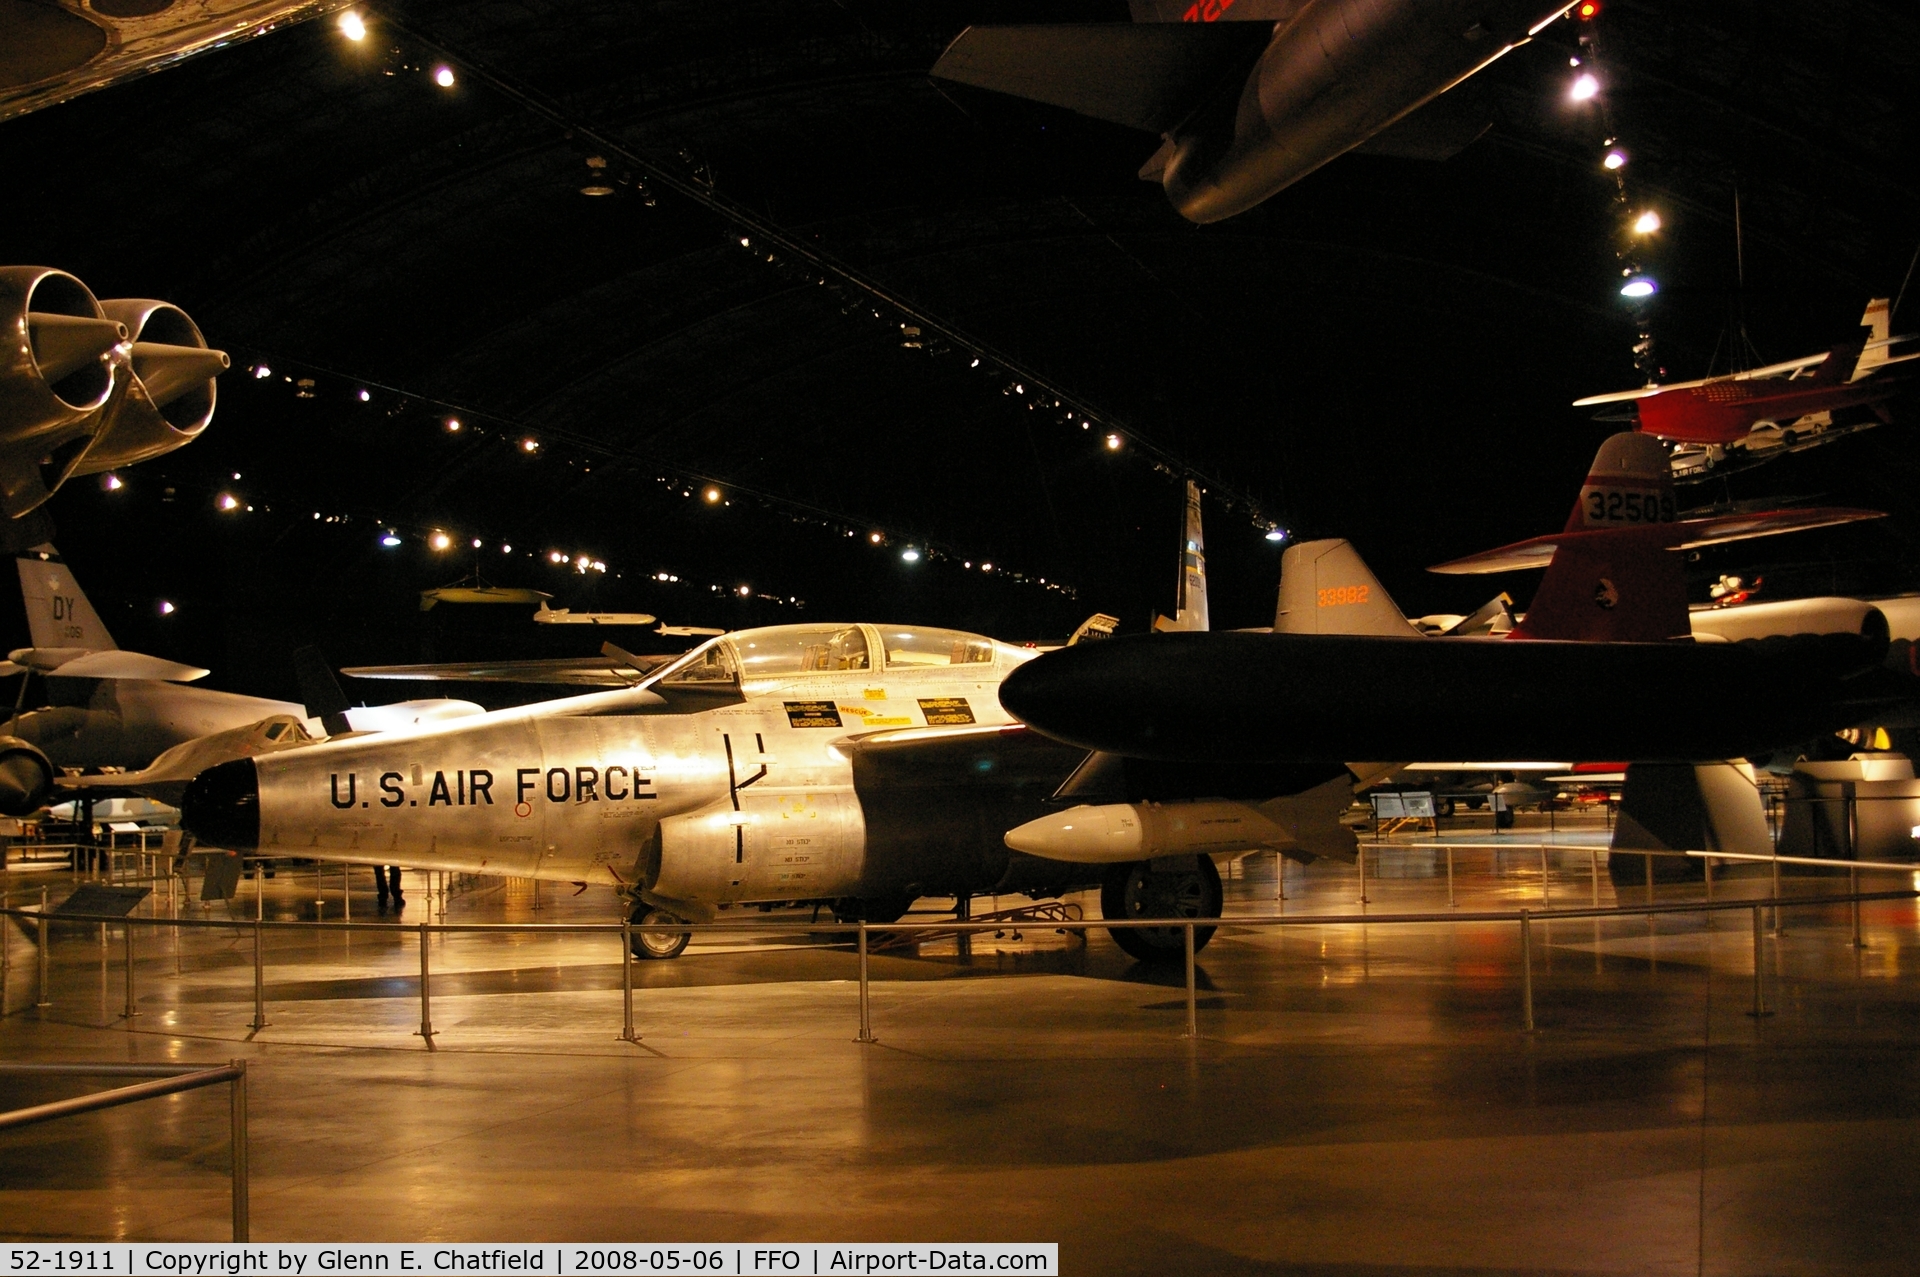 52-1911, 1952 Northrop F-89D Scorpion C/N Not found 52-1911, F-89D displayed at the National Museum of the U.S. Air Force